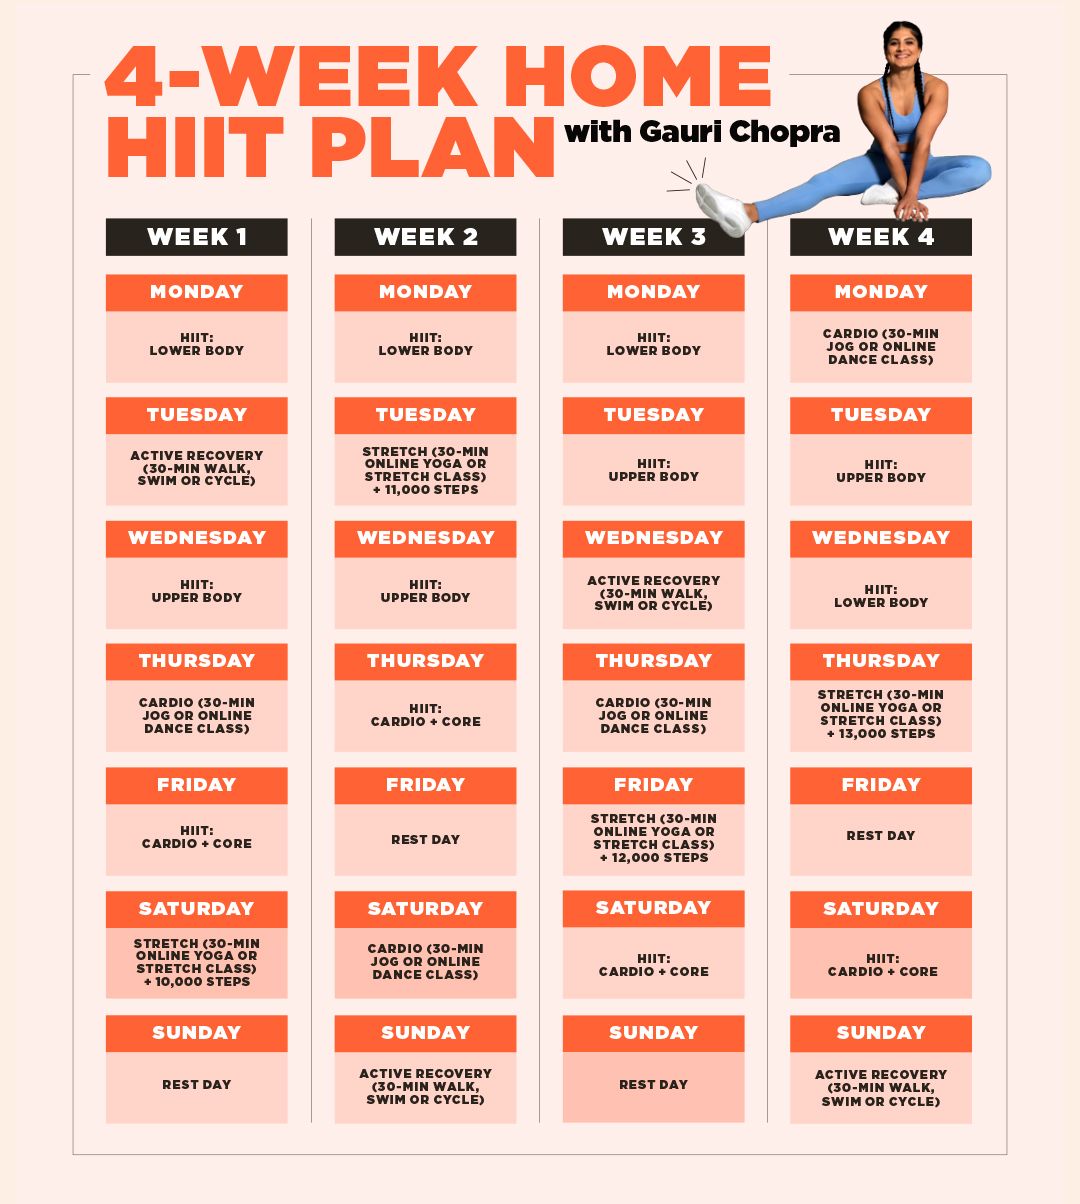 hiit workouts weight loss at home